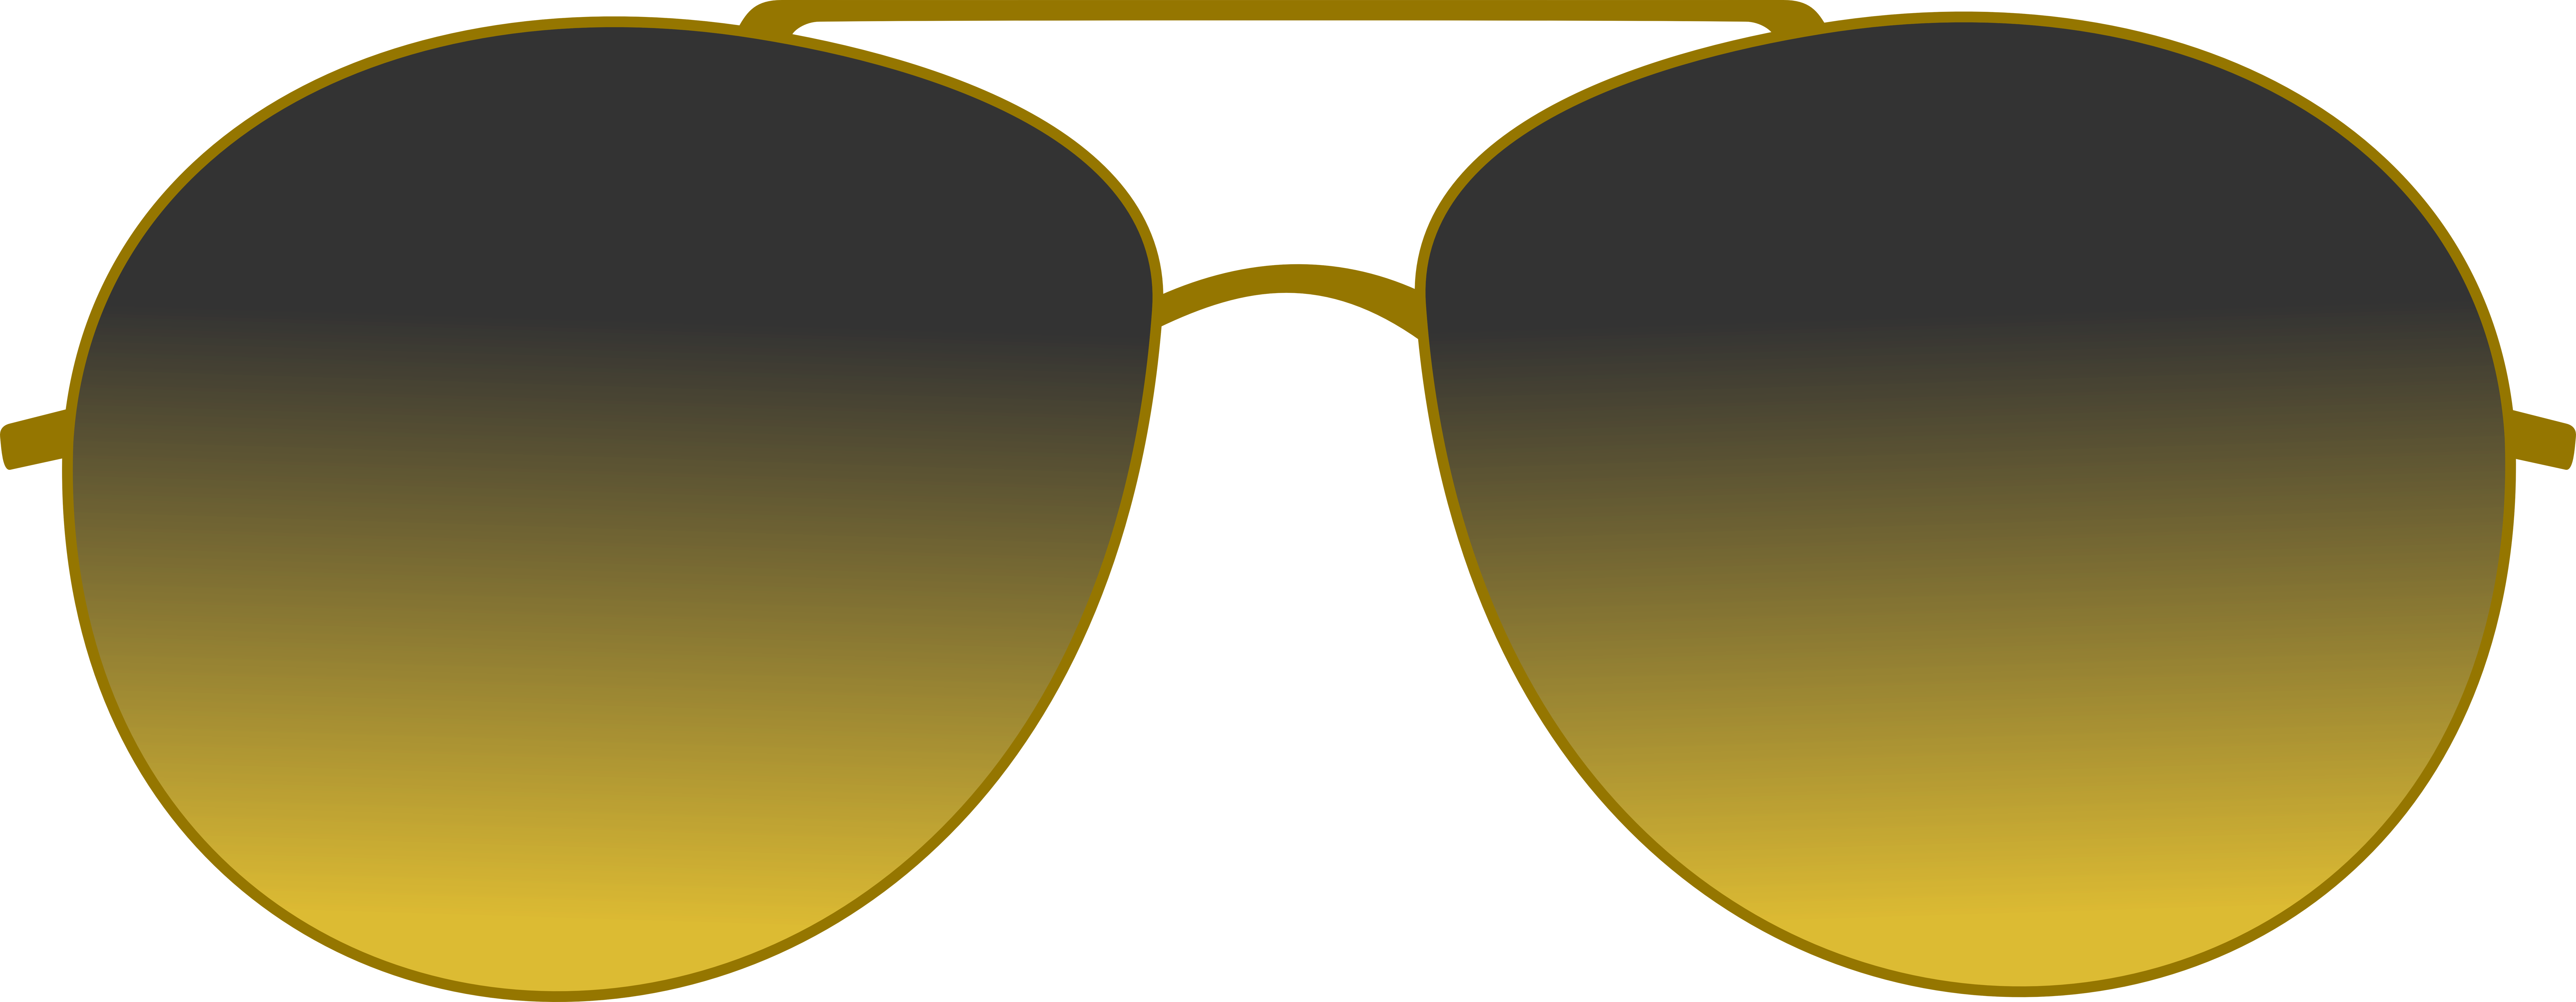 Sunglasses PNG Free File Download